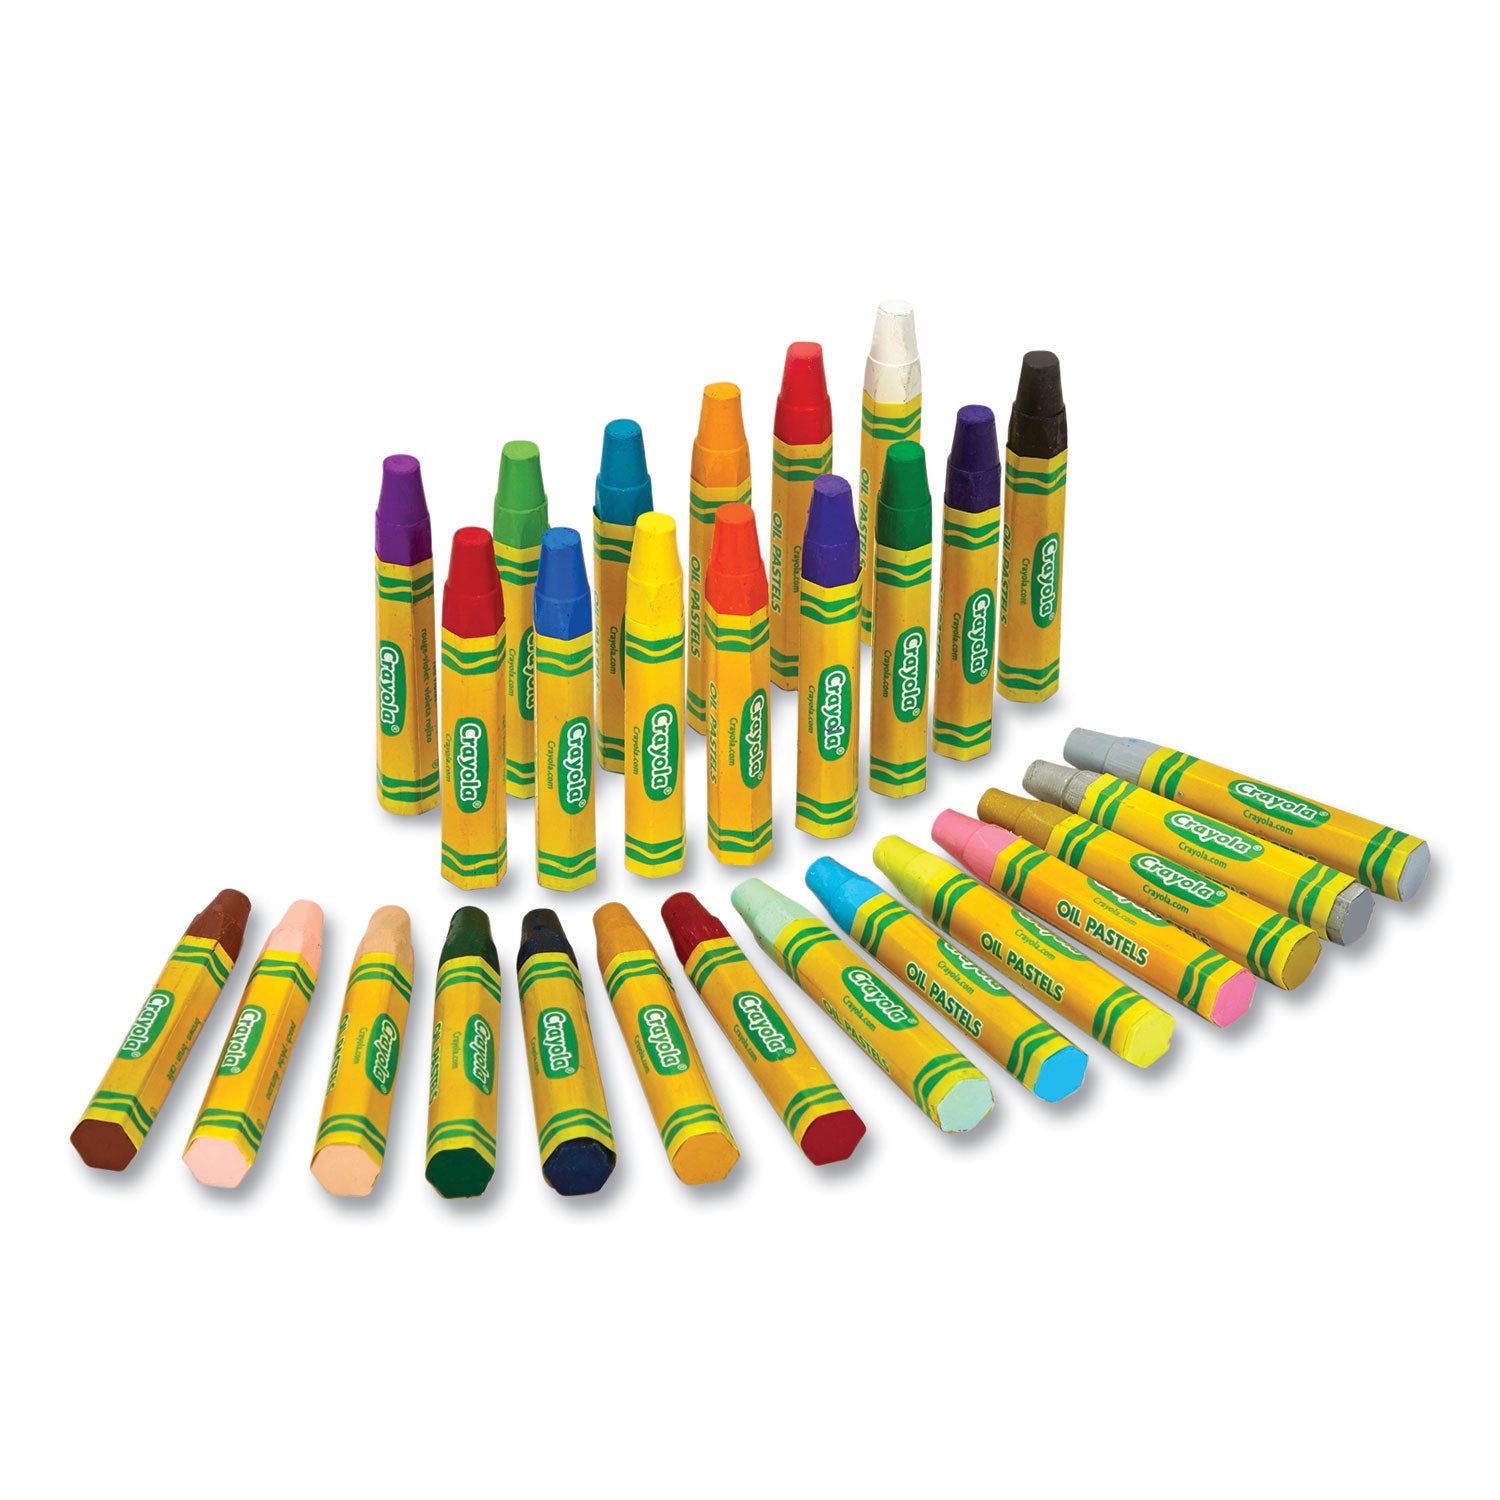 oil-pastels-28-assorted-colors-28-pack_cyo524628 - 2